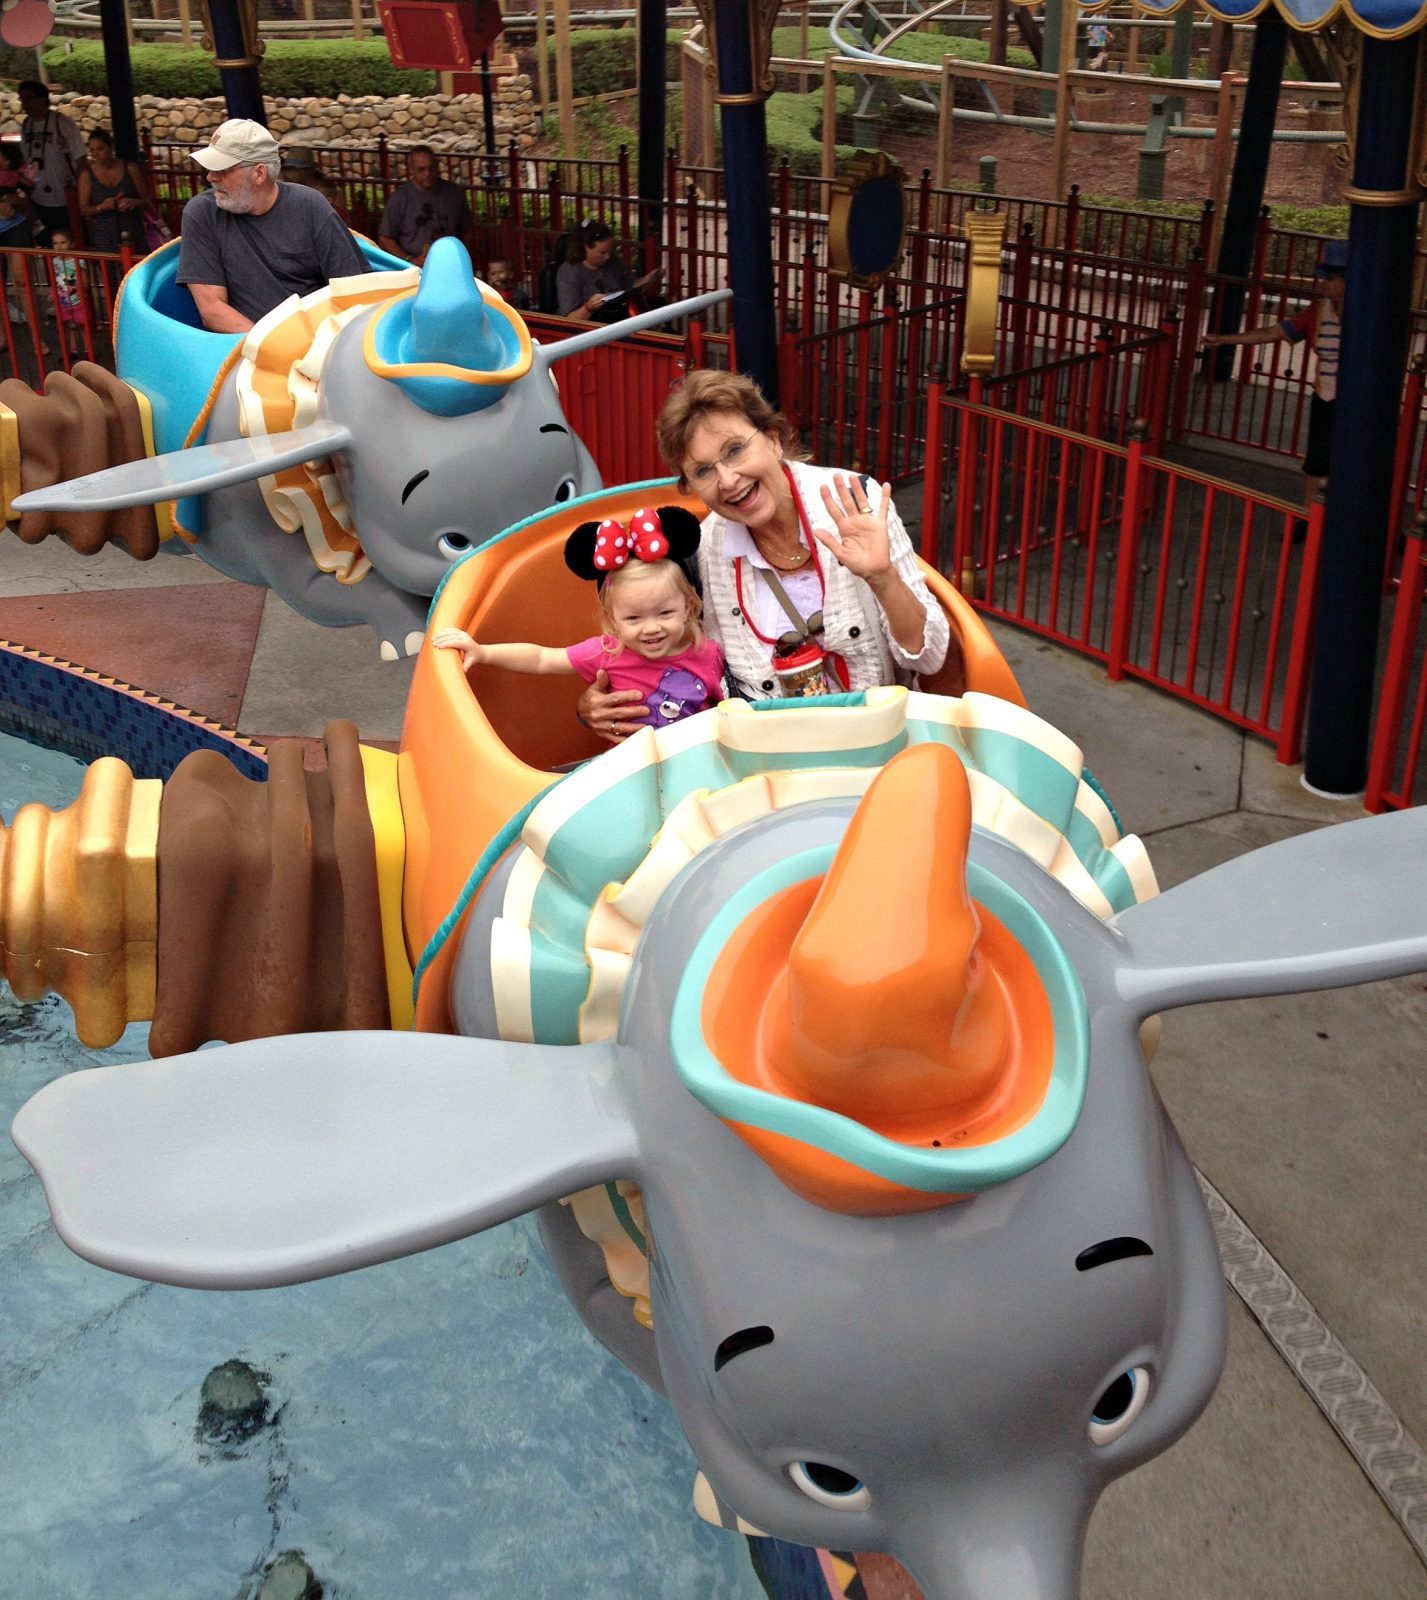 woman and child smiling, riding in Dumbo ride